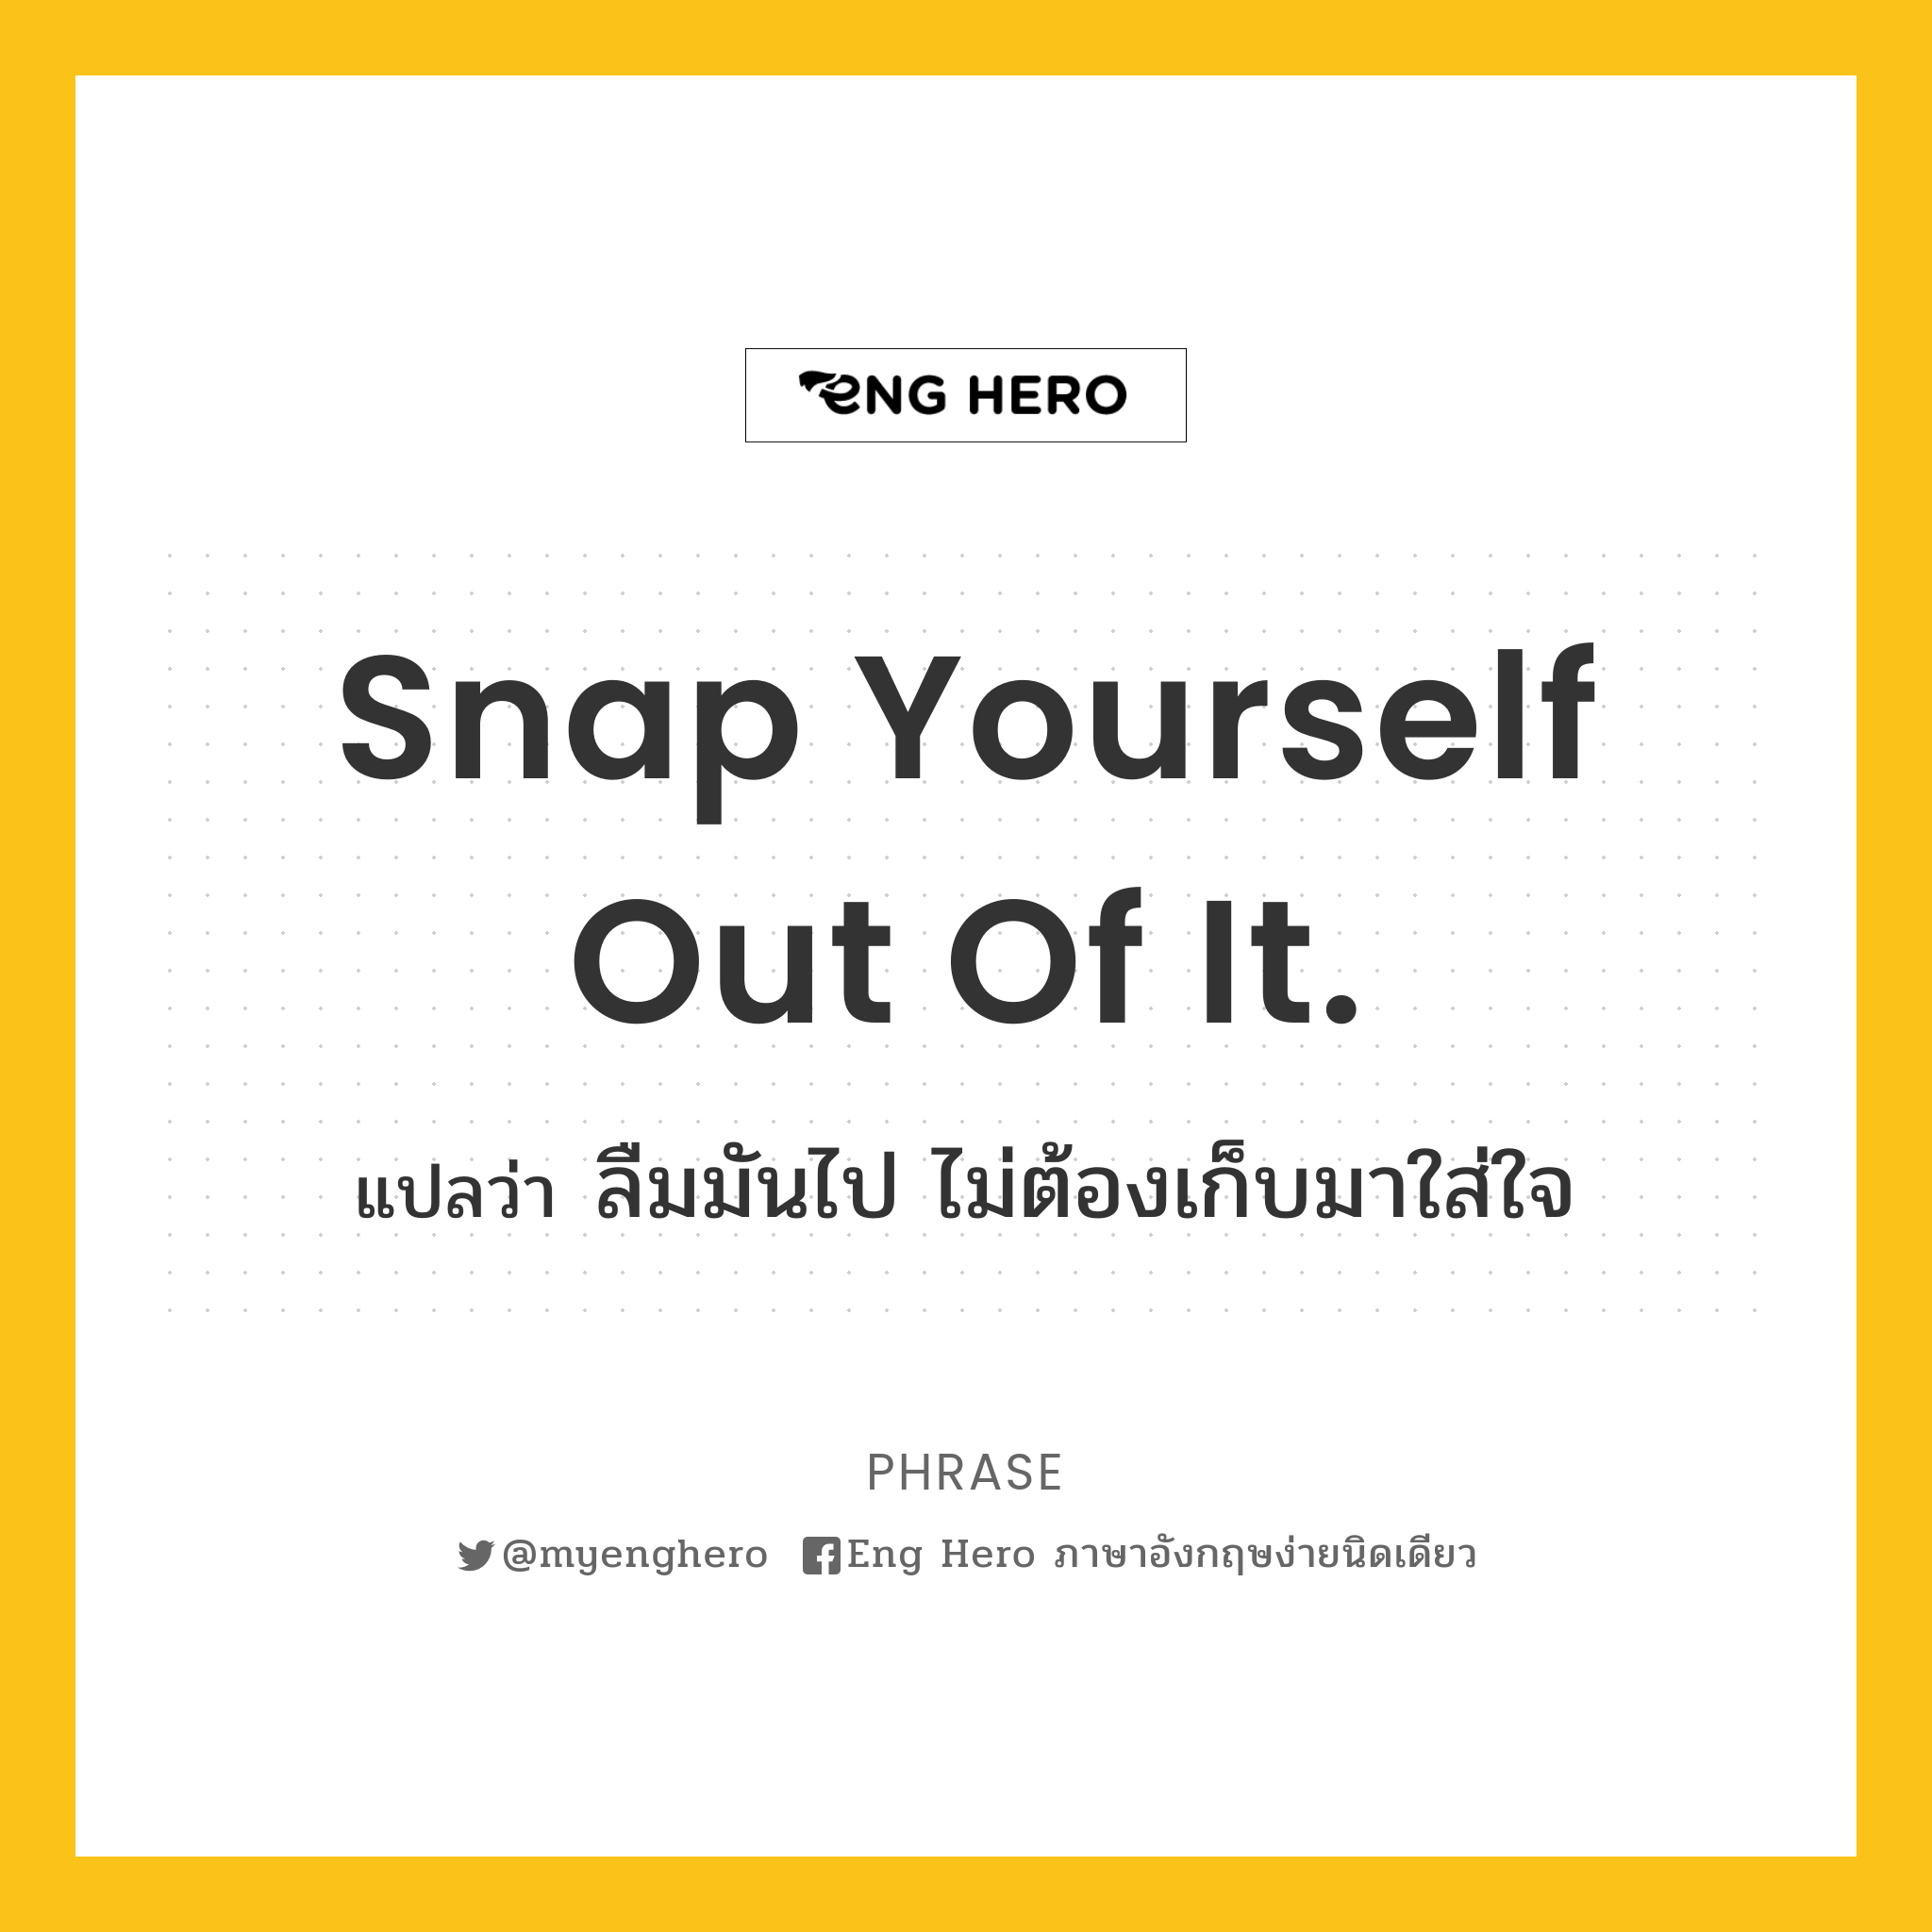 Snap yourself out of it.